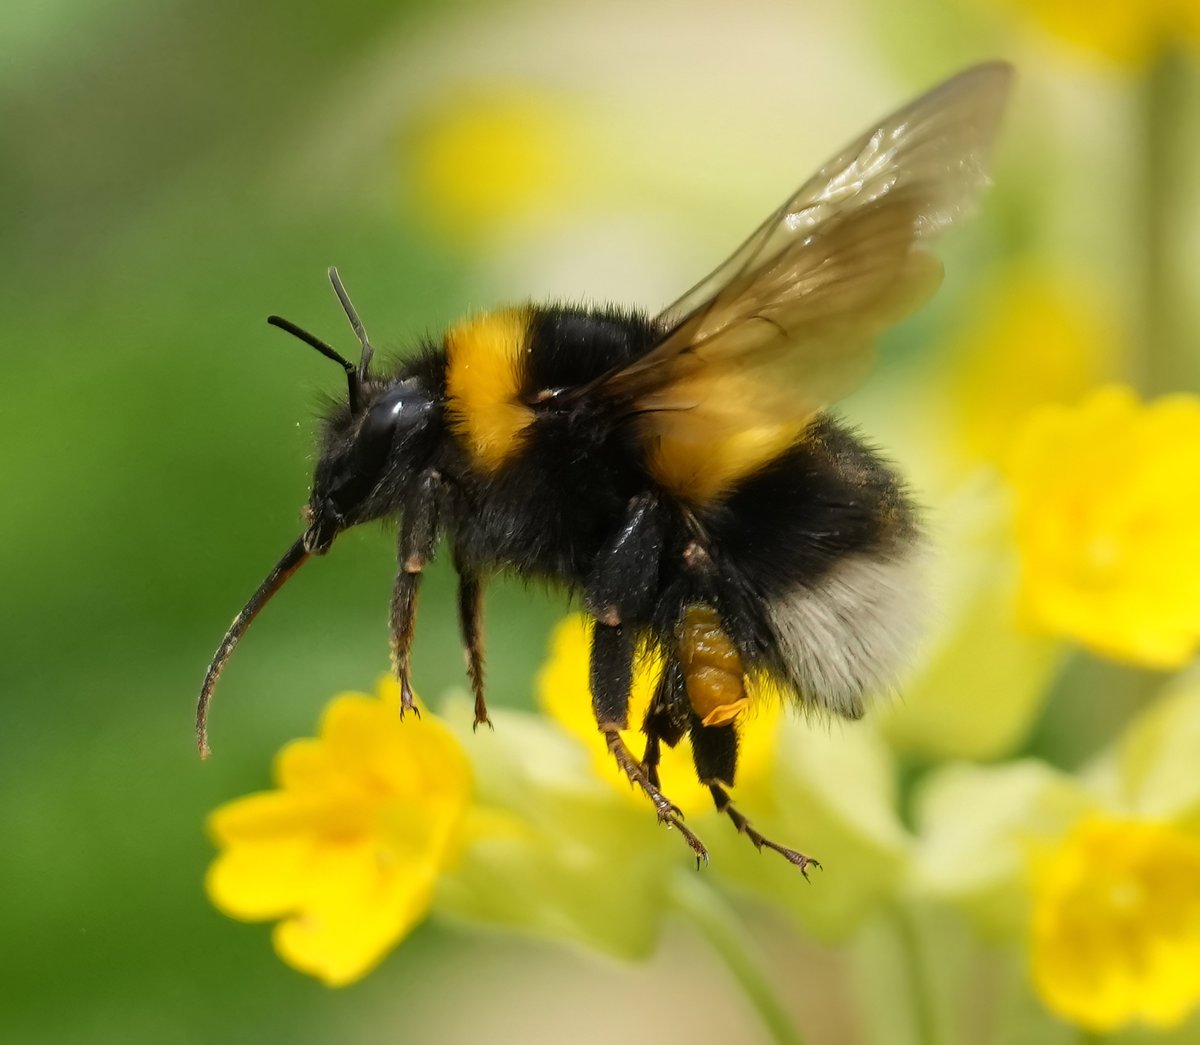 Bumbling en route to my cowslip. #TwitterNaturePhotography #TwitterNaturePhotography #bee #NaturePhotography #beeinflight #naturelovers #gardenphotography #amateurphotography #lovewhereyoulive